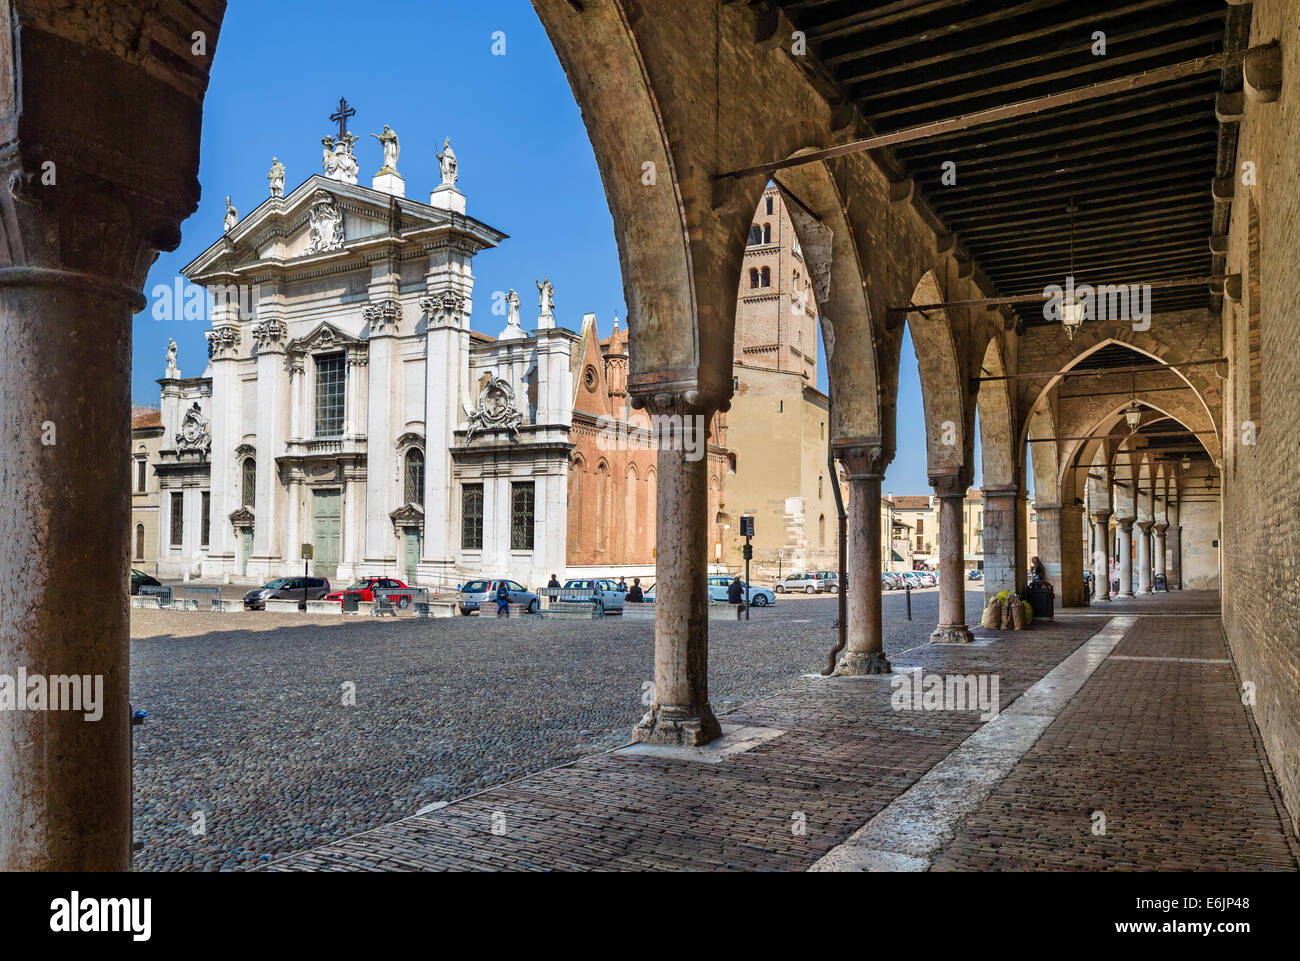 Portico round the Palazzo Ducale looking towards the Duomo, Piazza Sordello, Mantua, Lombardy, Italy Stock Photo